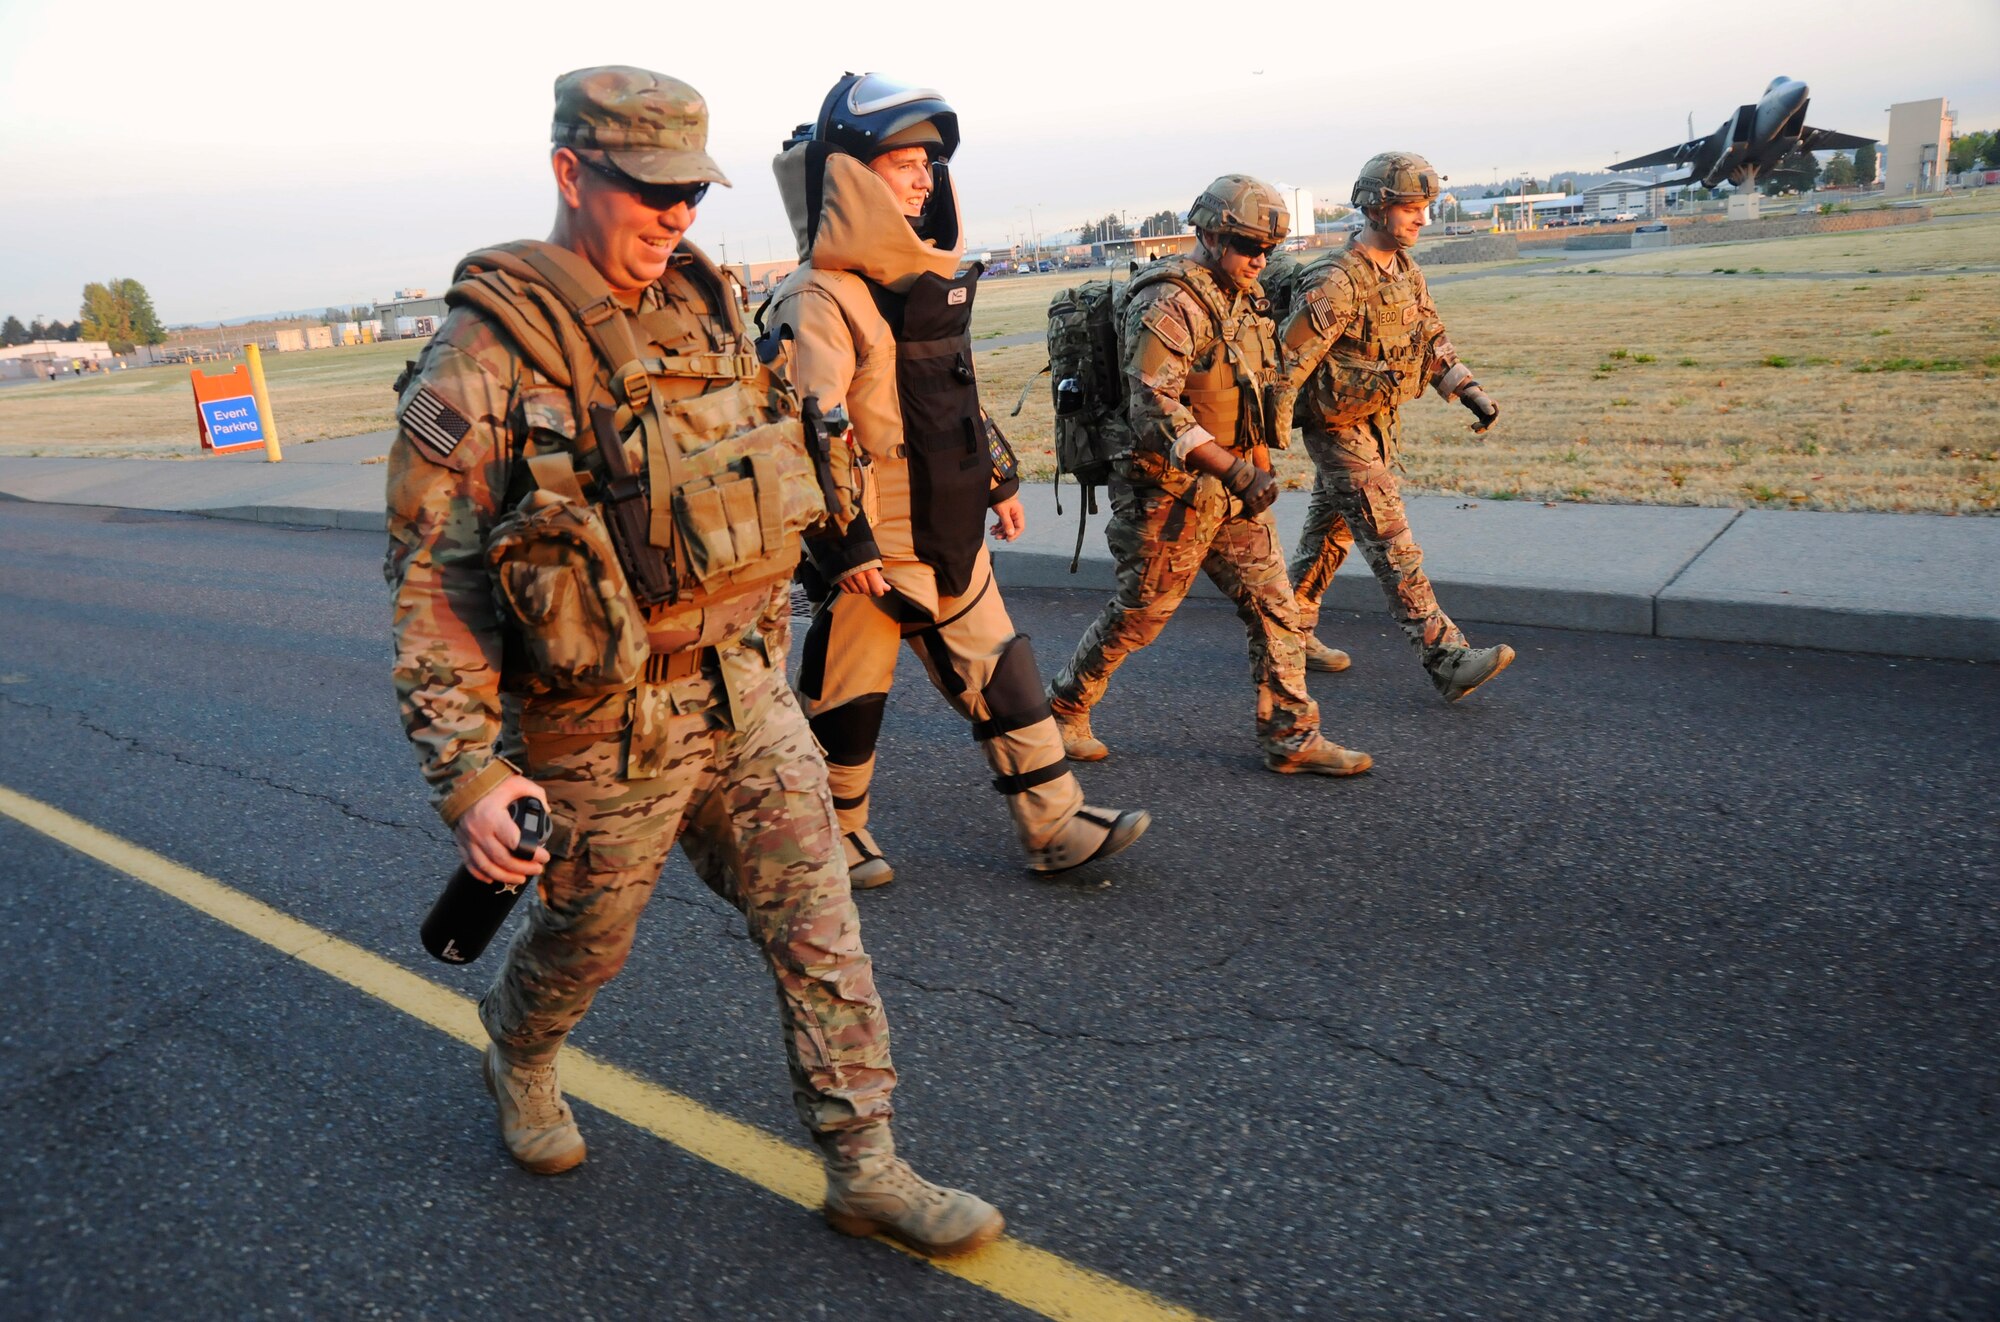 Four Explosive Ordinance Disposal members of the 142nd Fighter Wing Civil Engineer Squadron walk together along the ‘Ruck, Run and Walk’, route at the Portland Air National Guard Base, Ore., Sept. 11, 2015. (U.S. Air National Guard photo by Tech. Sgt. John Hughel, 142nd Fighter Wing Public Affair/Released)